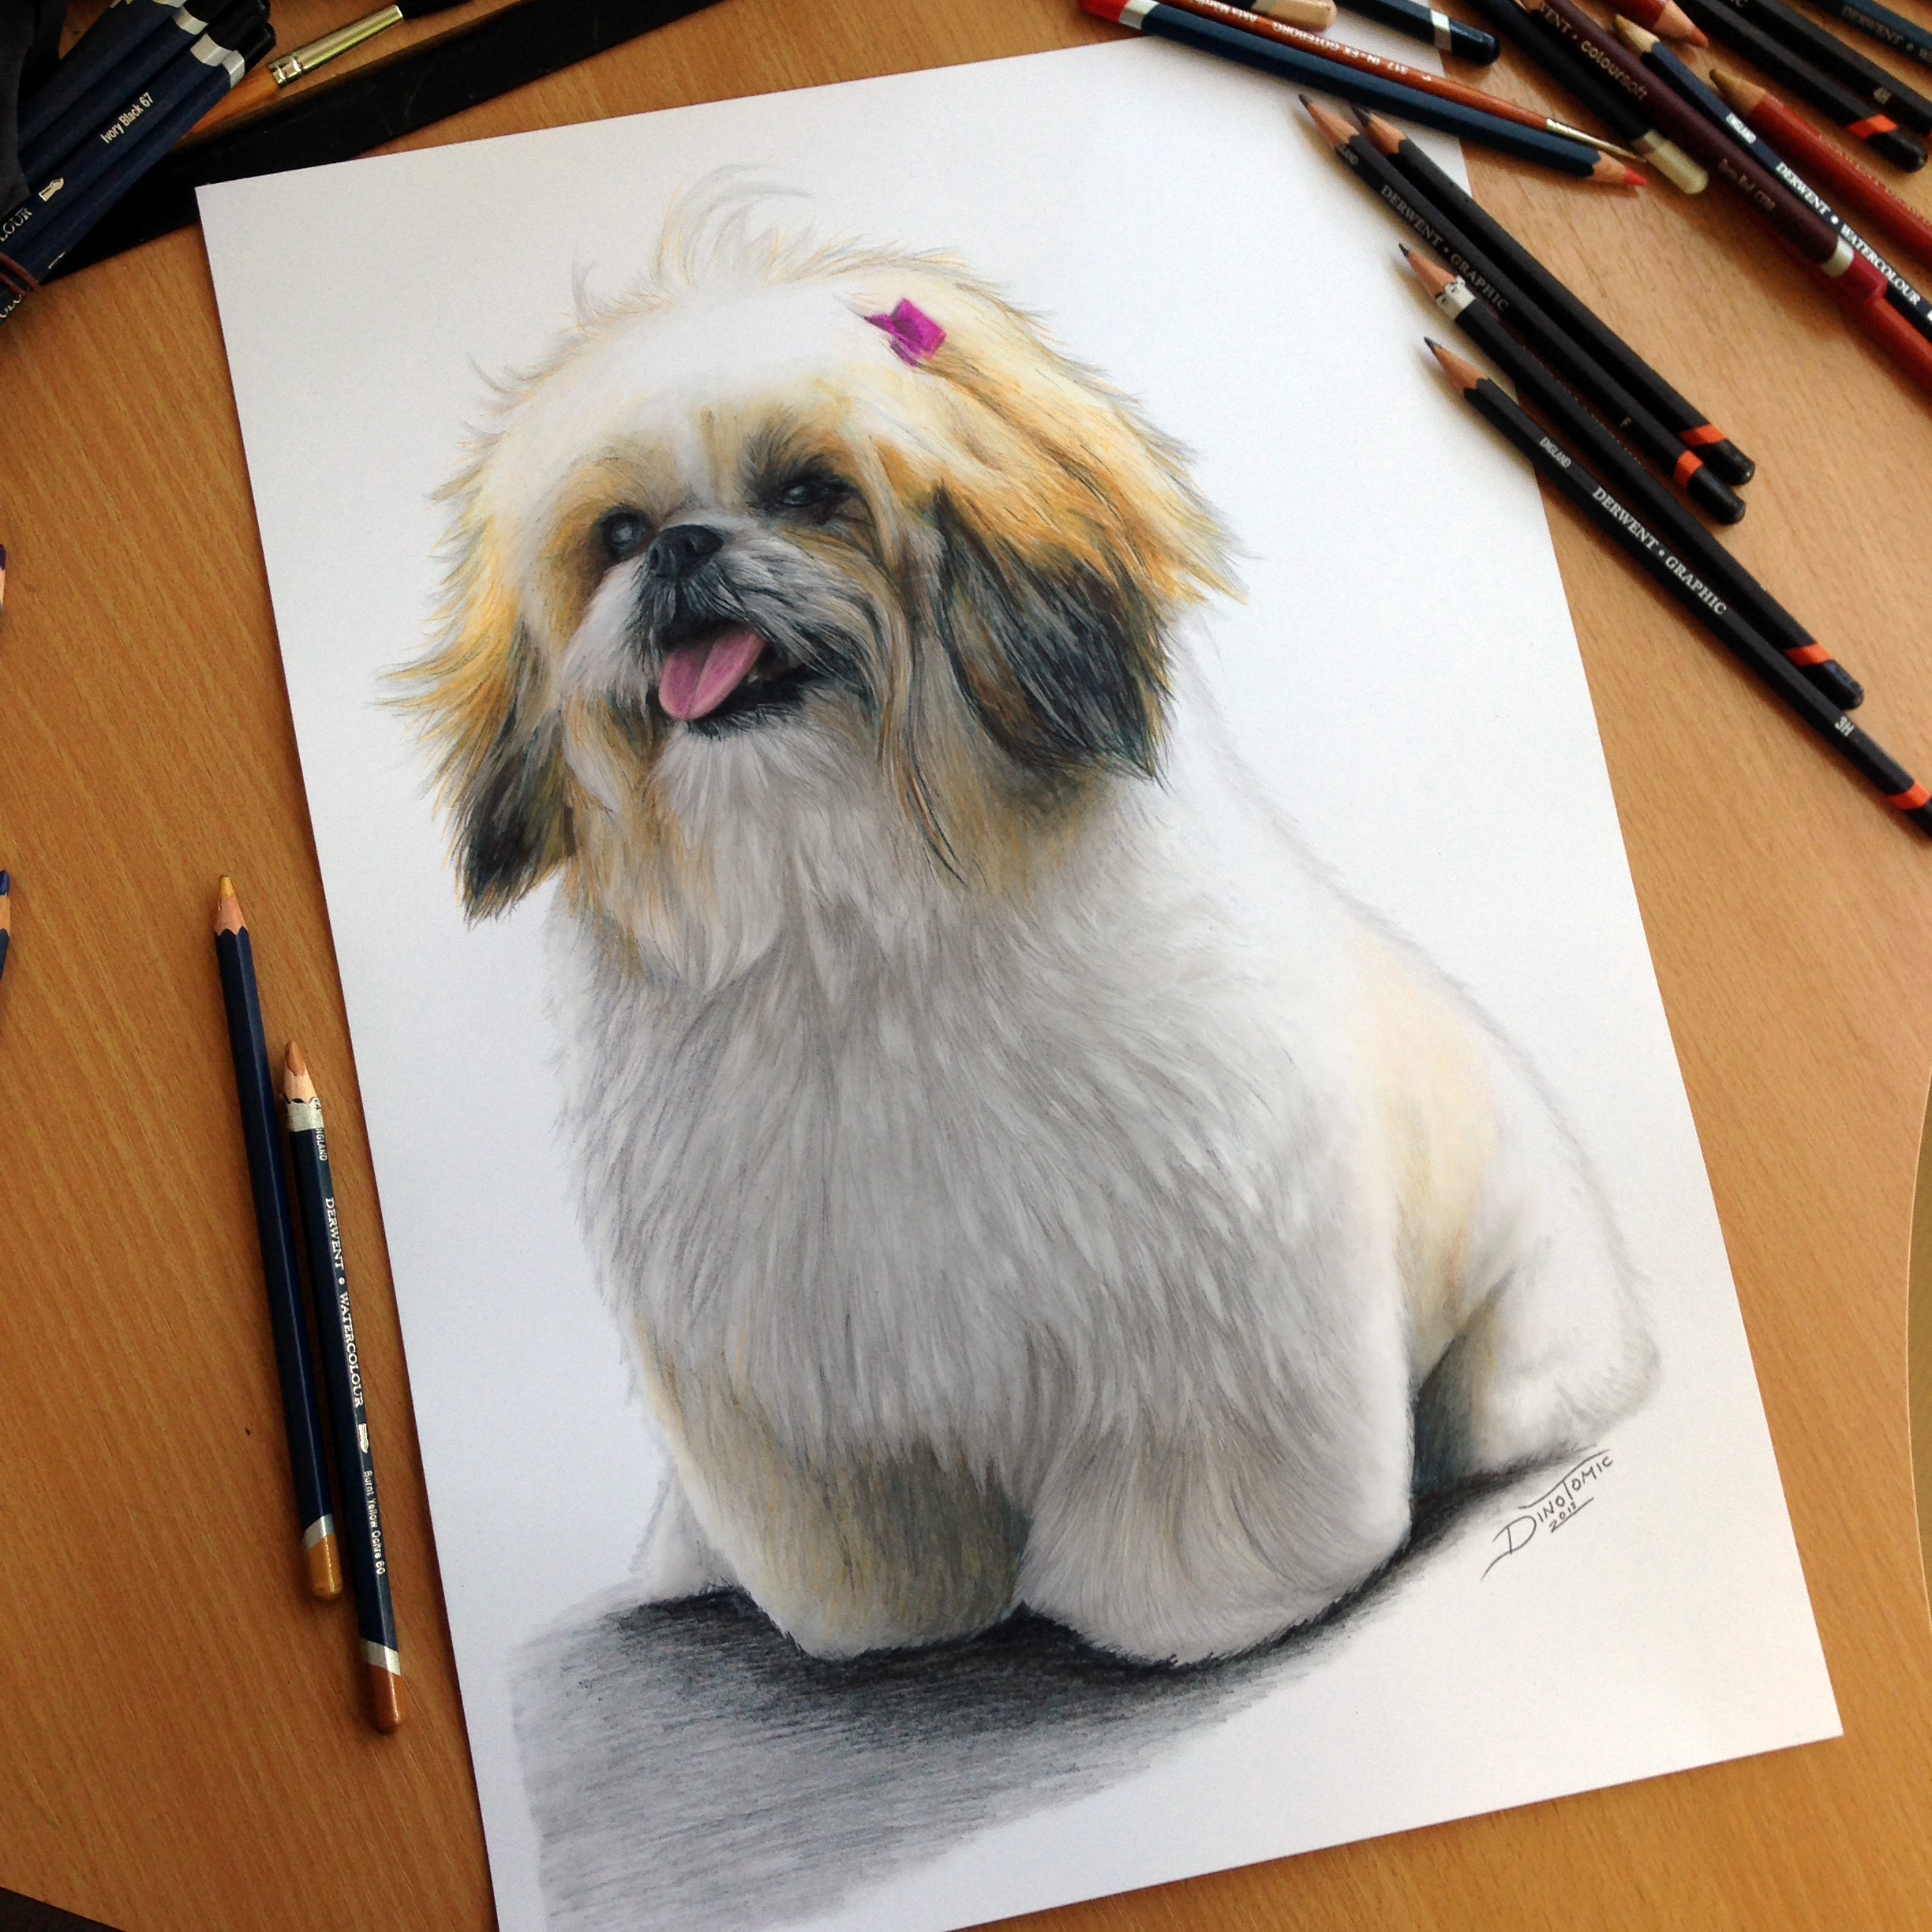 Puppy Pencil Drawing by AtomiccircuS on DeviantArt